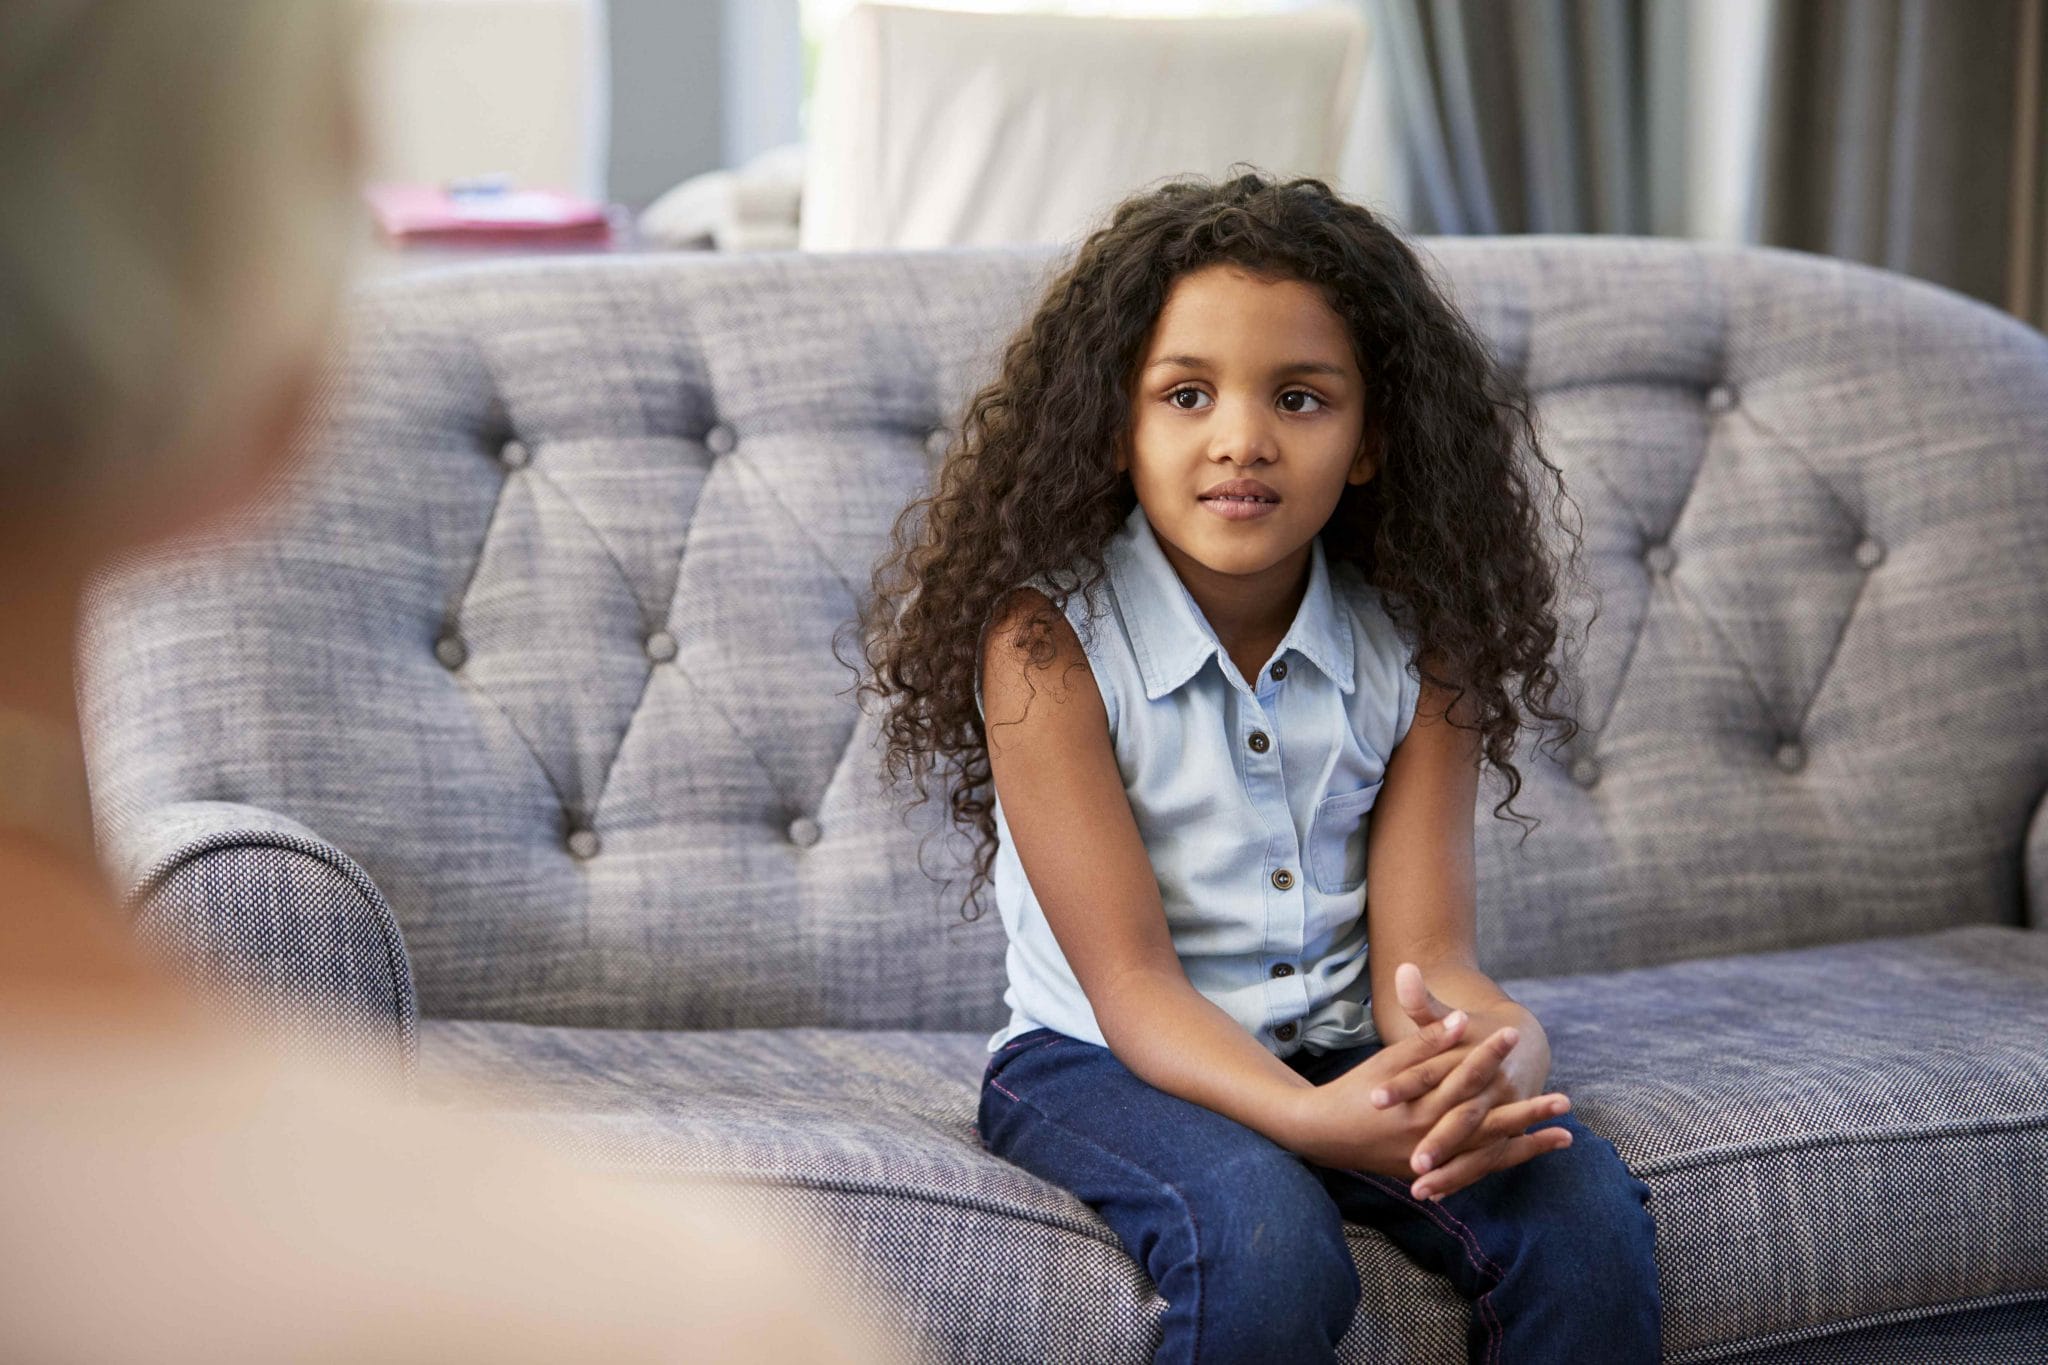 child sitting on couch during therapy session speaking with mental health therapist